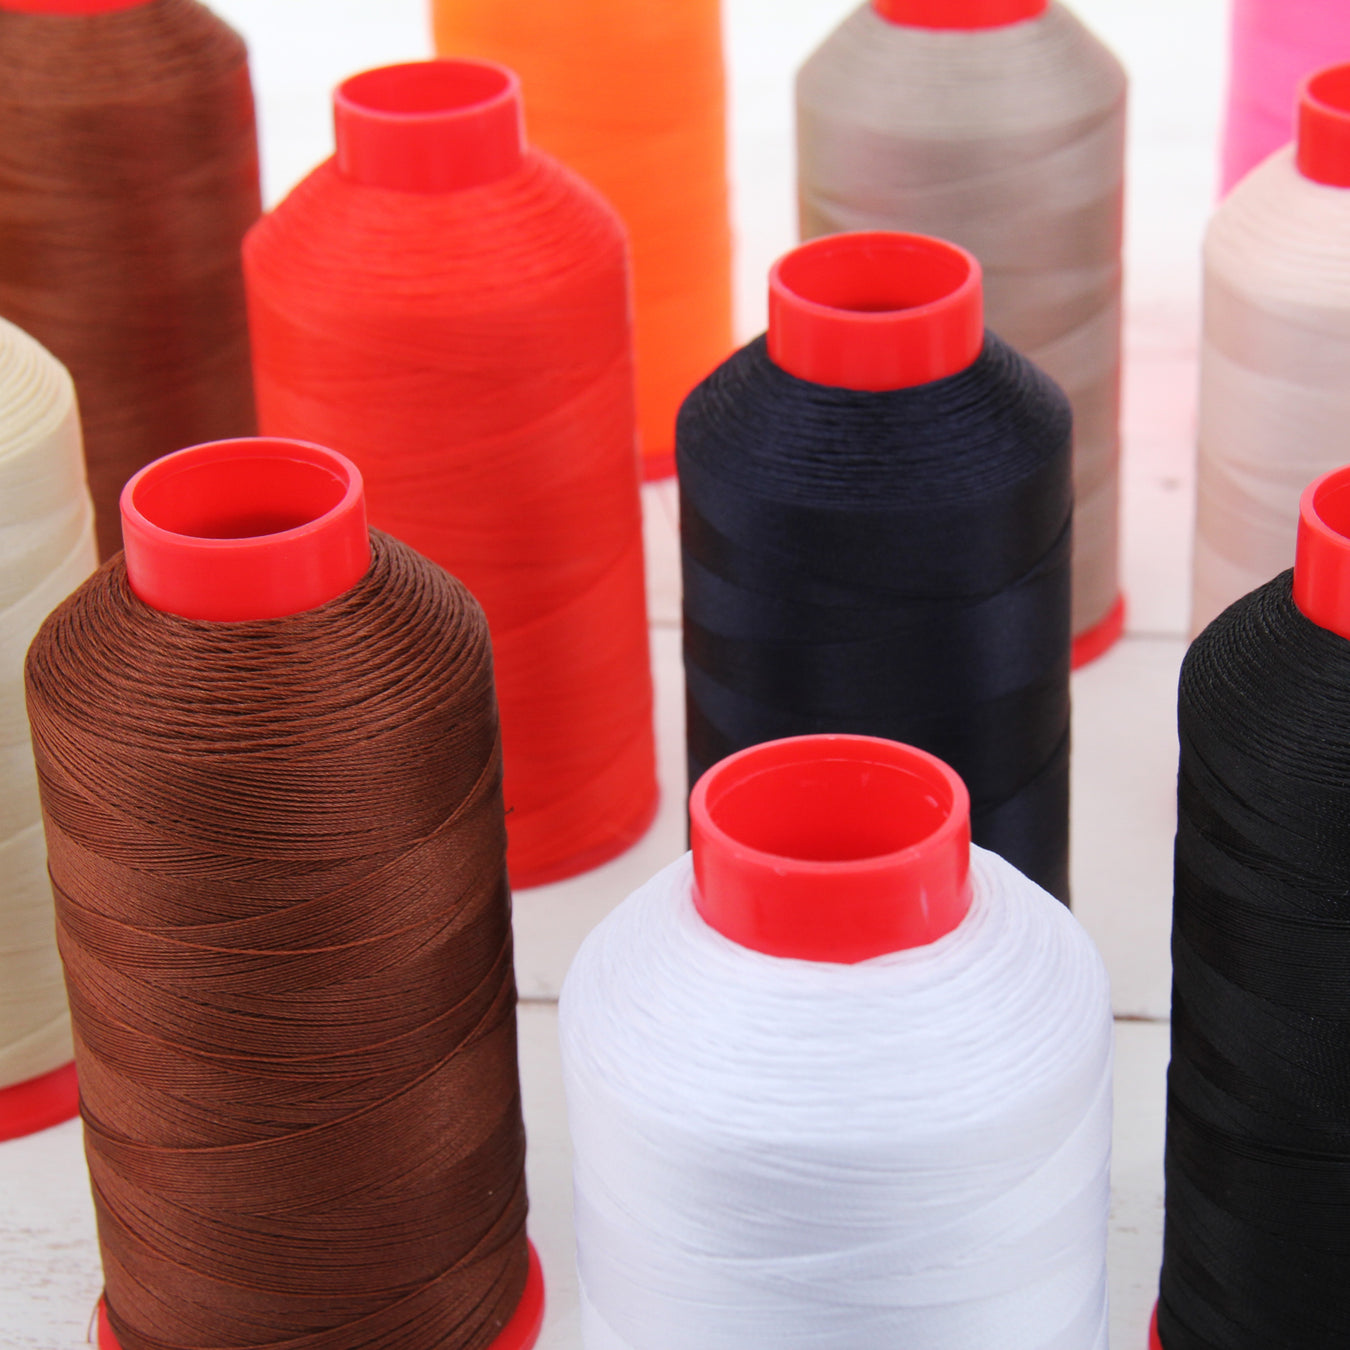 Sewing Thread - The Best in Basics and Specialty Threads – Fararti